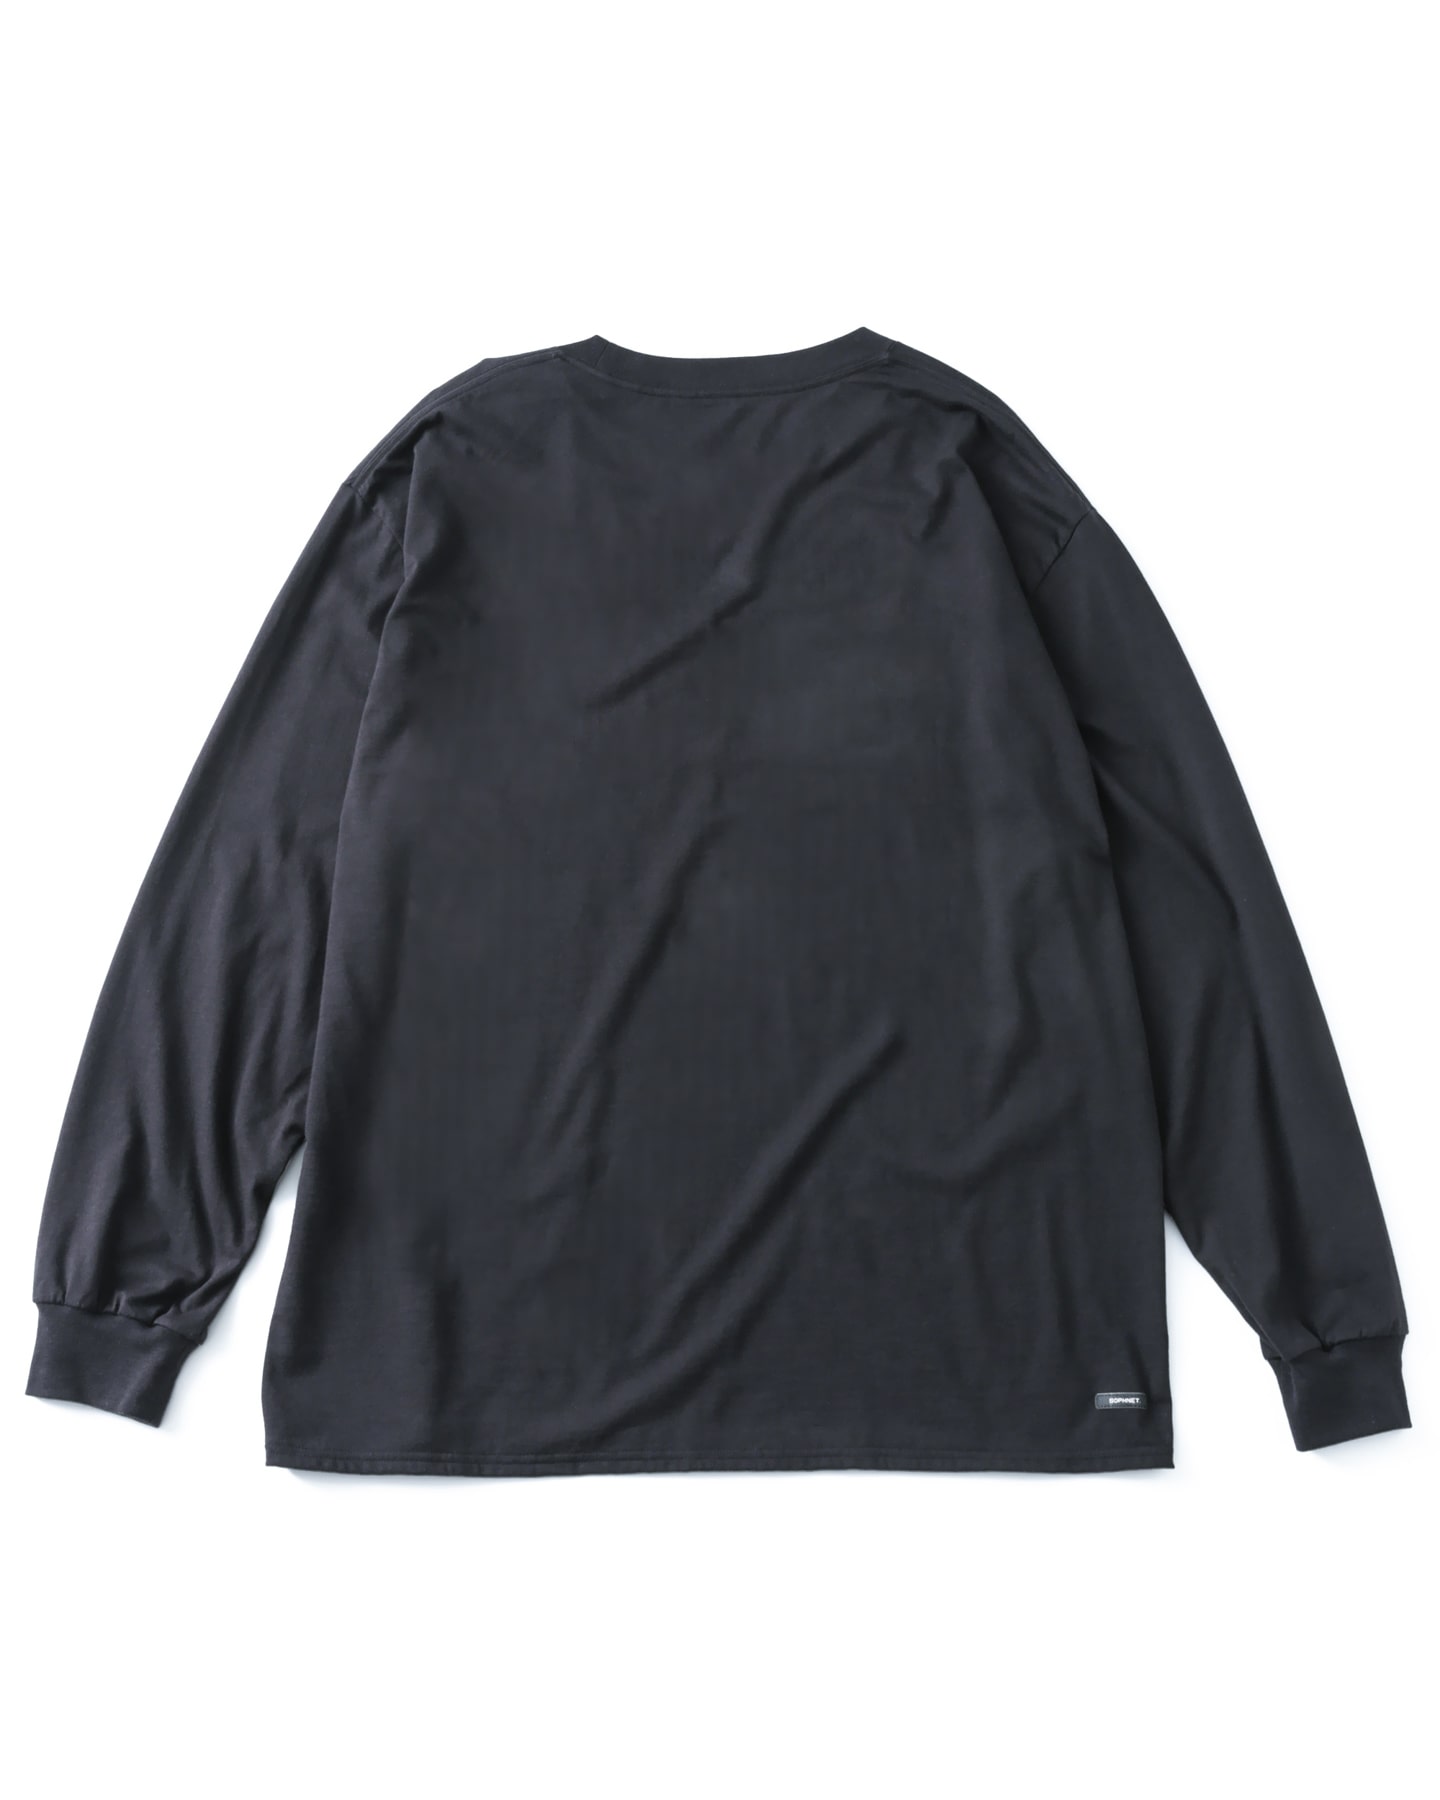 SOPH. | SUPIMA CASHMERE L/S BAGGY TEE(S BLACK):